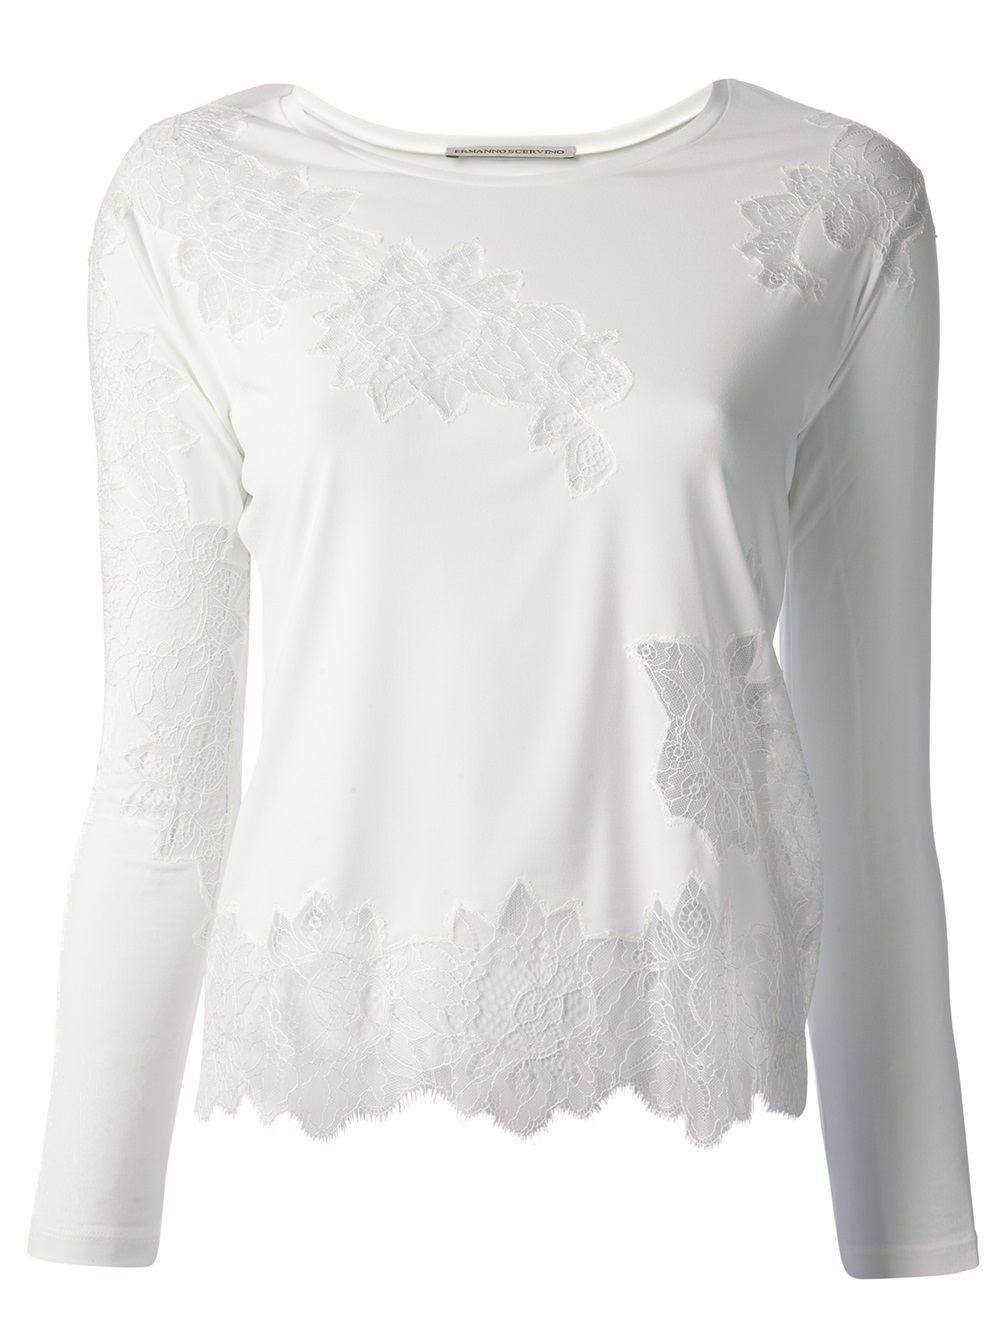 Ermanno Scervino Lace Insert Top in White - Lyst